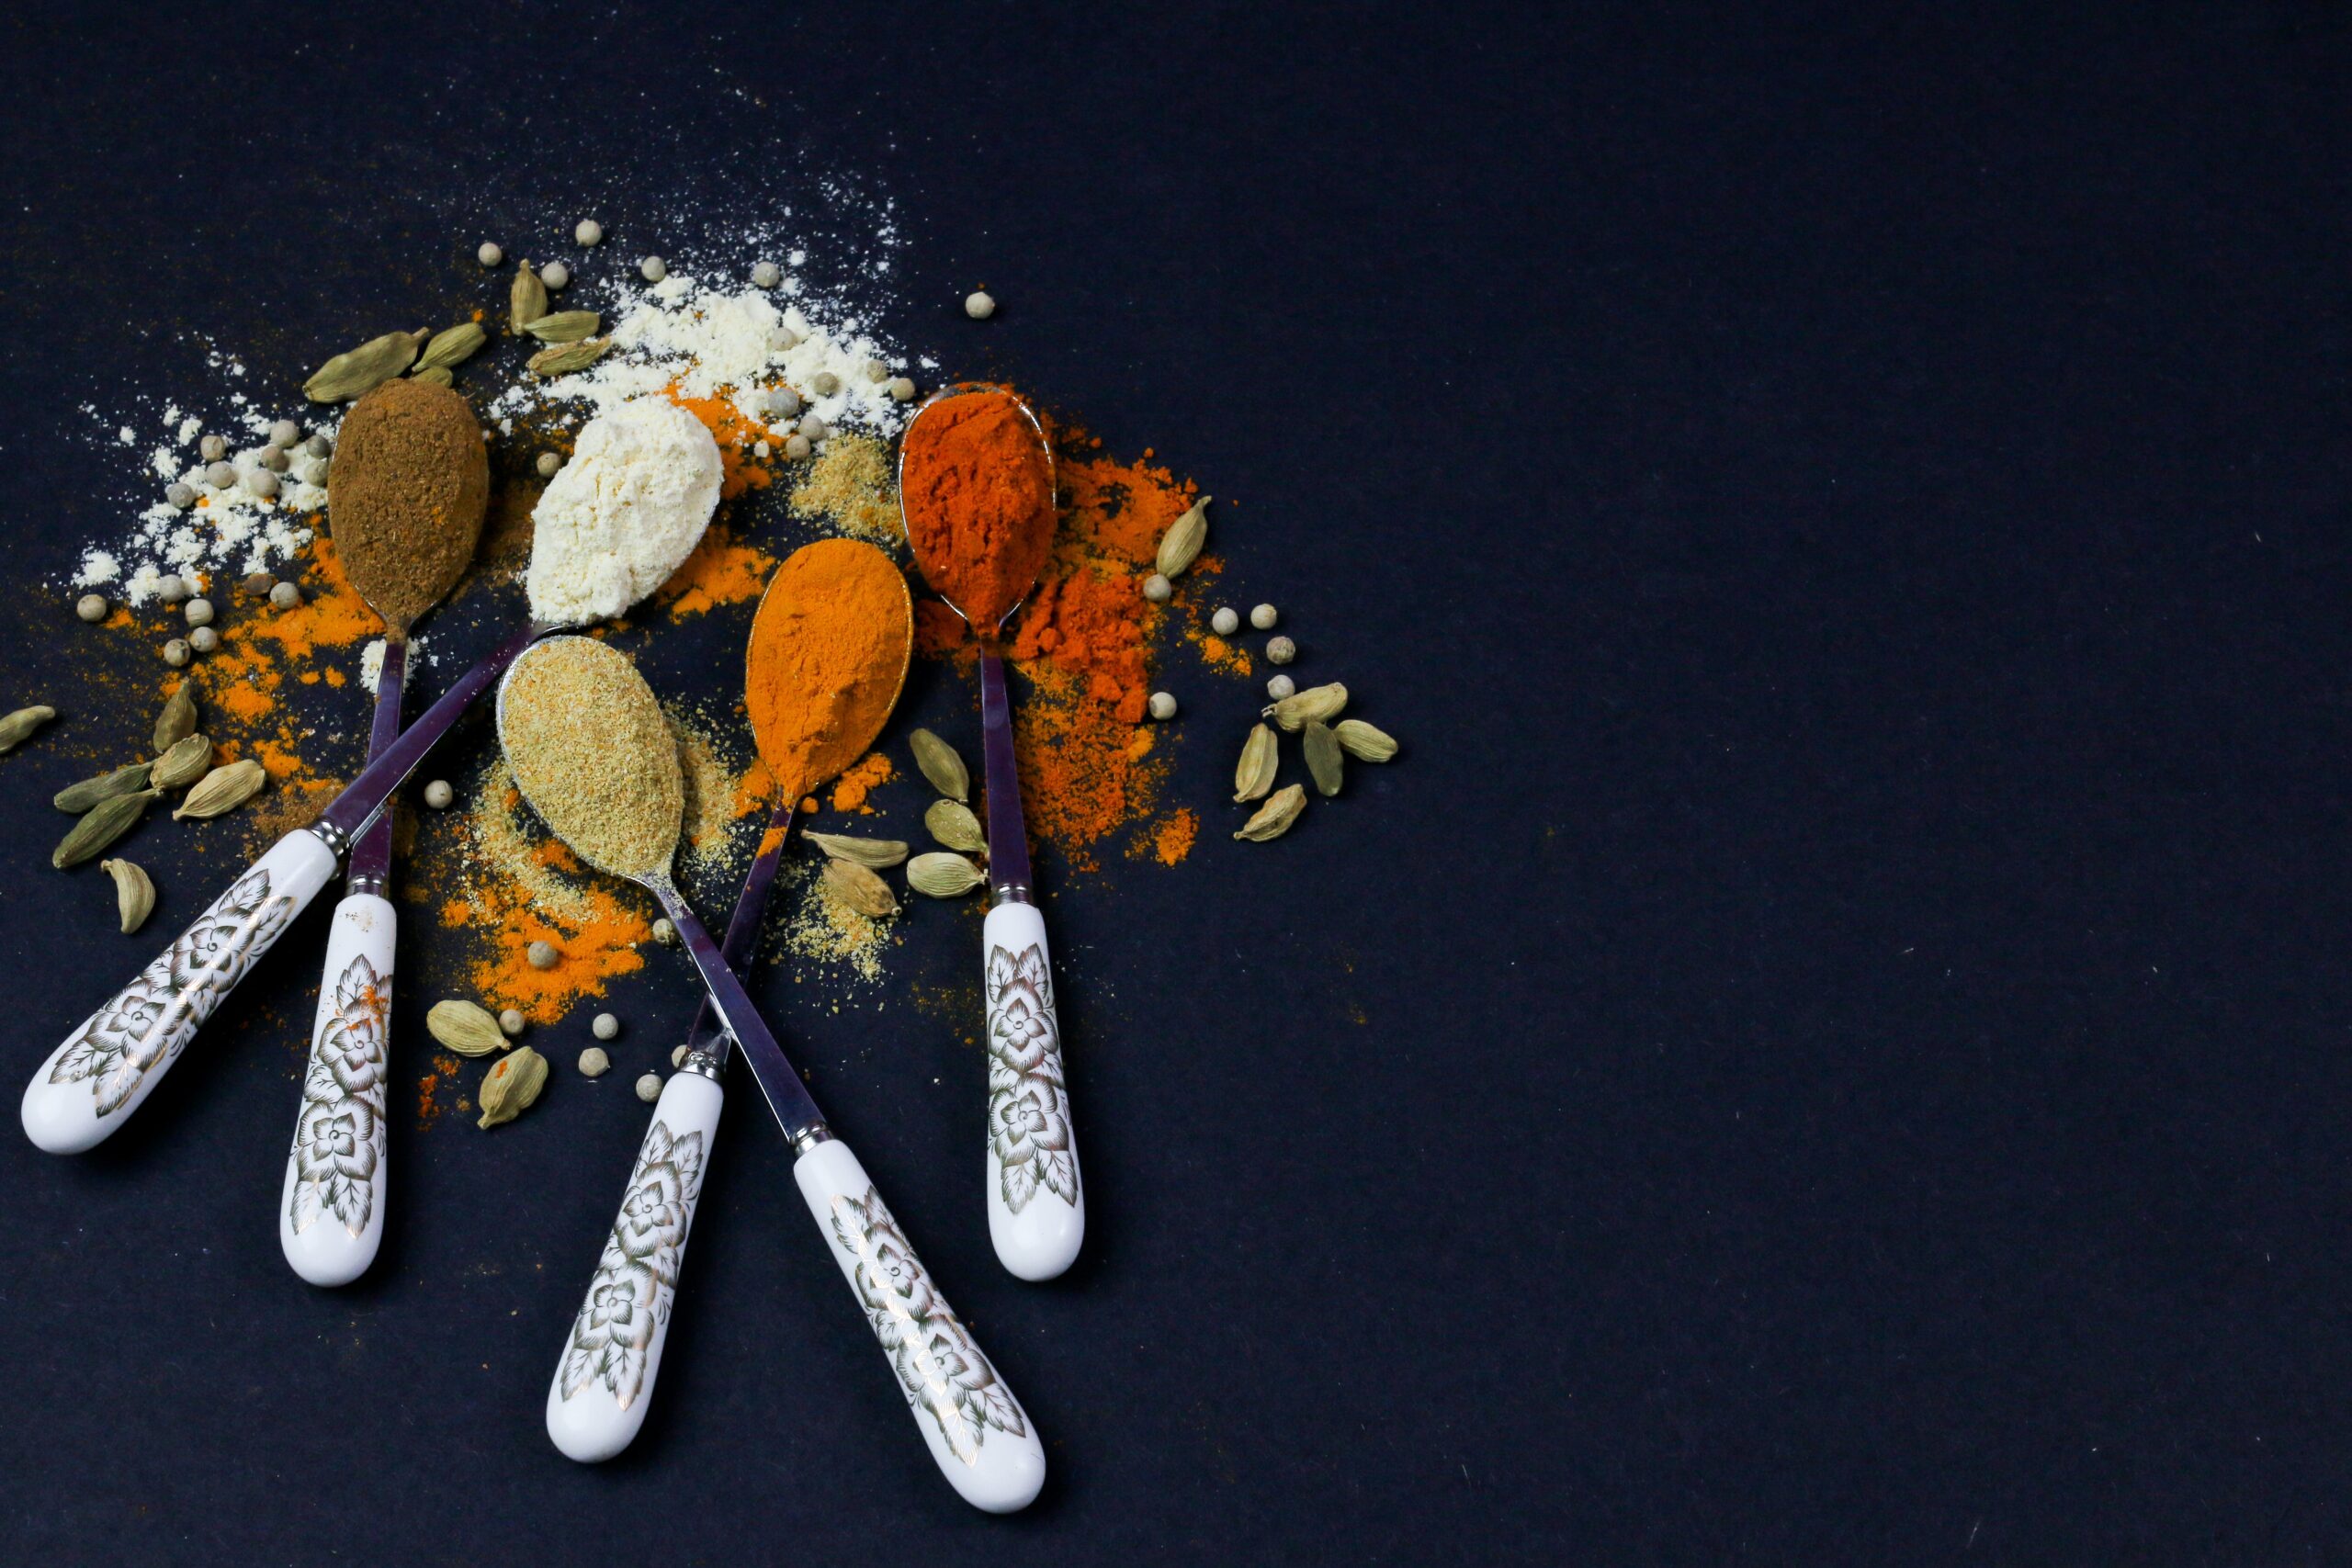 Five spoons holding a variety of spices resting on a dark tabletop surface.